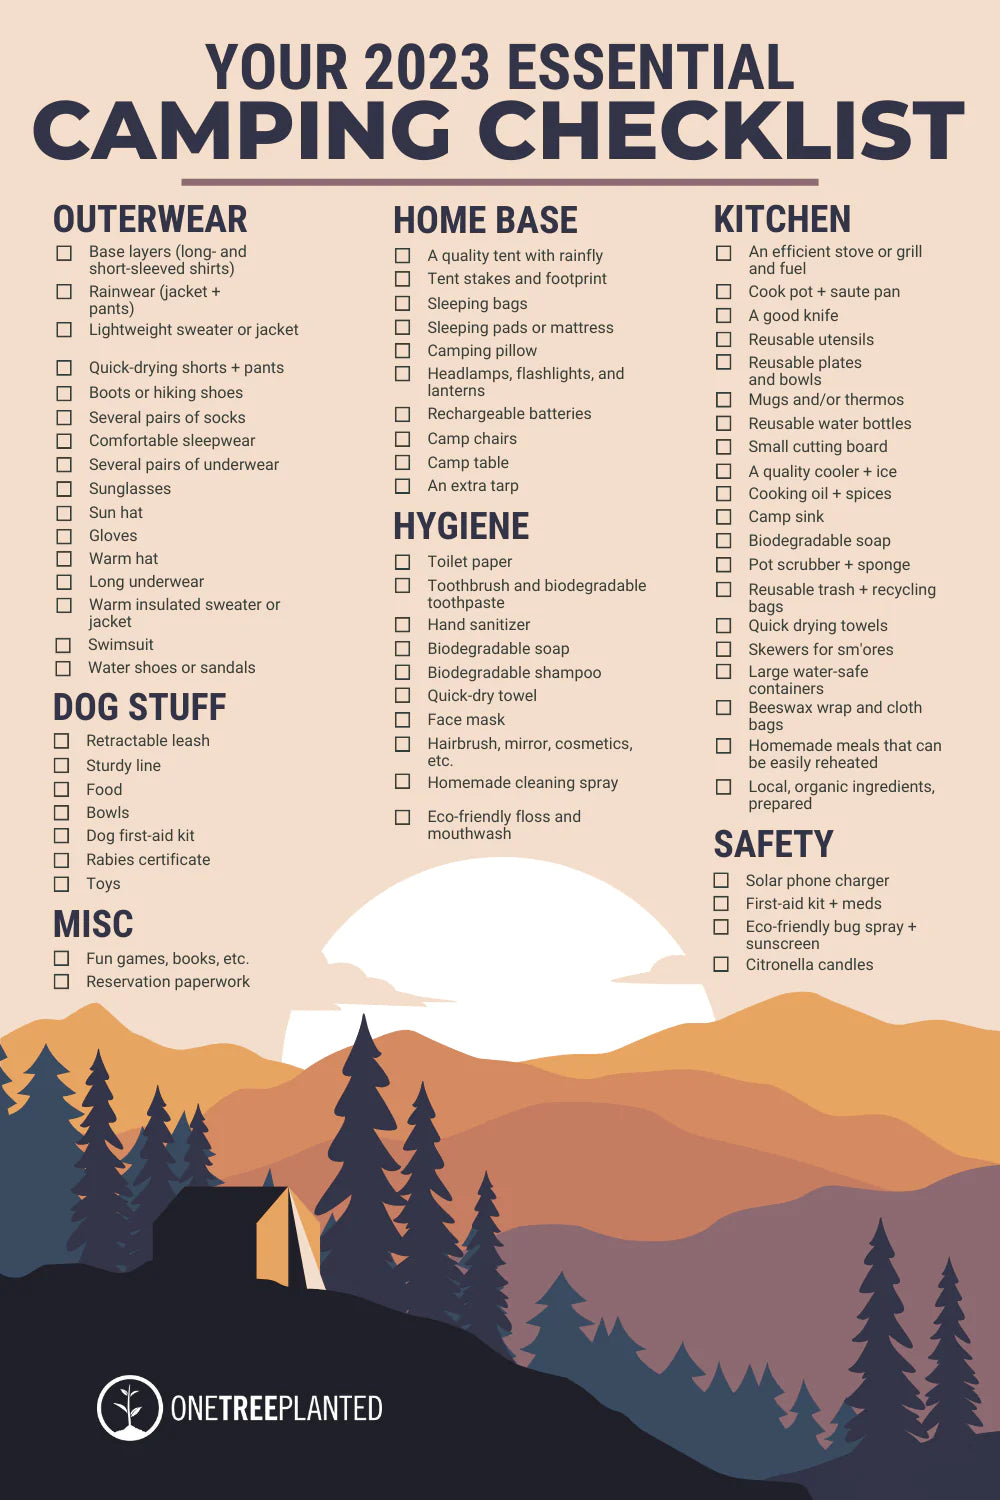 5 Sustainable Camping Essentials For Your Next Hike - Going Zero Waste